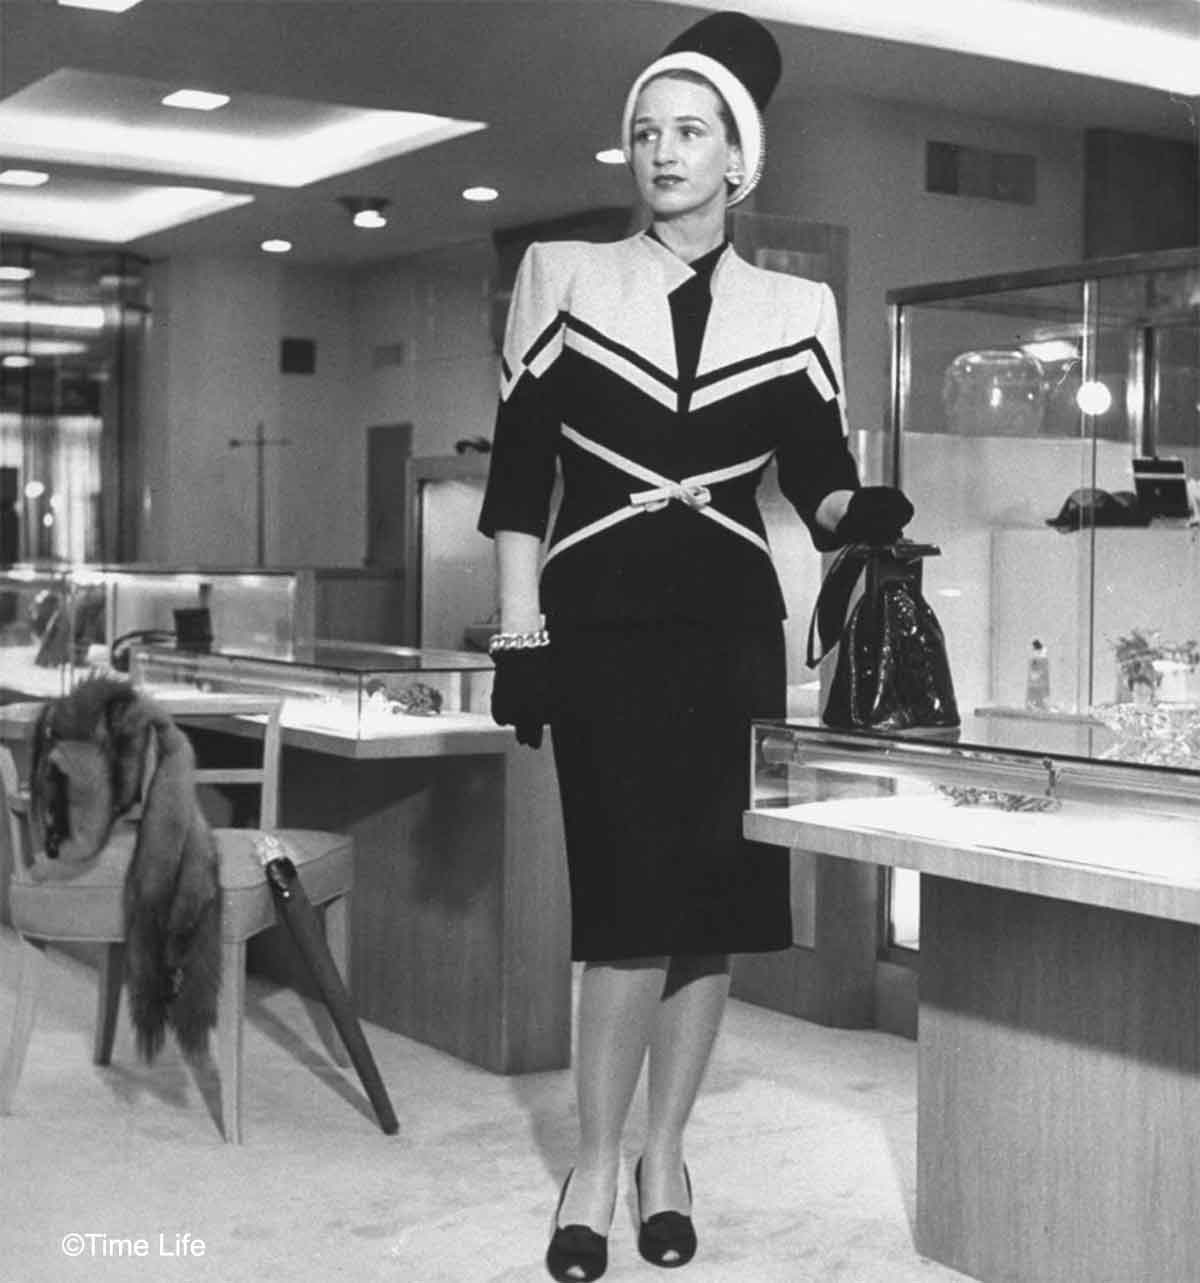 Neiman-Marcus---The-1940s-US-Fashion-Store